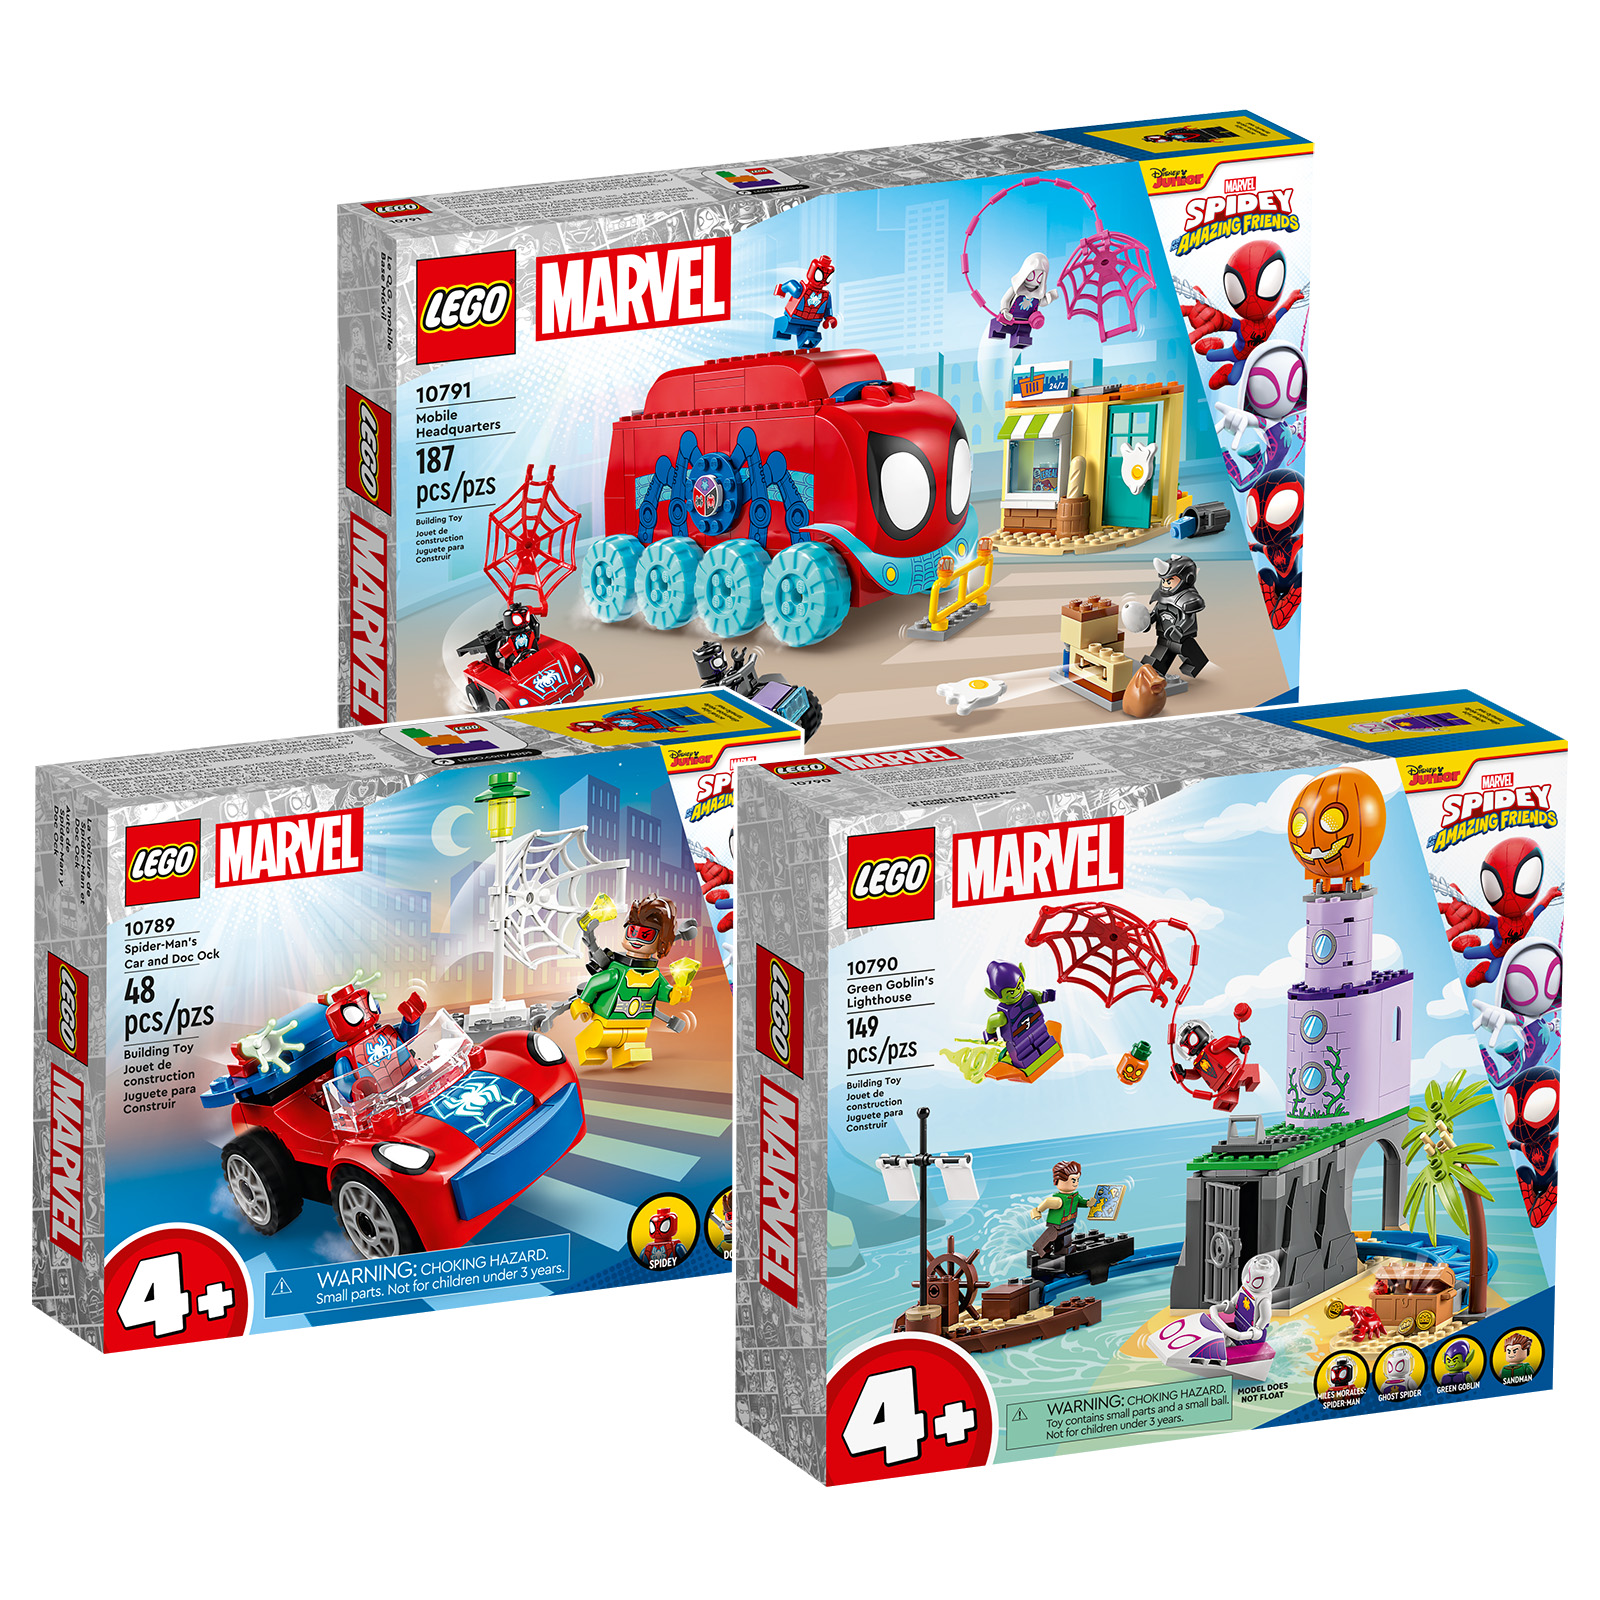 New in LEGO Marvel 2023: Spidey and his Amazing Friends sets are online on the Shop